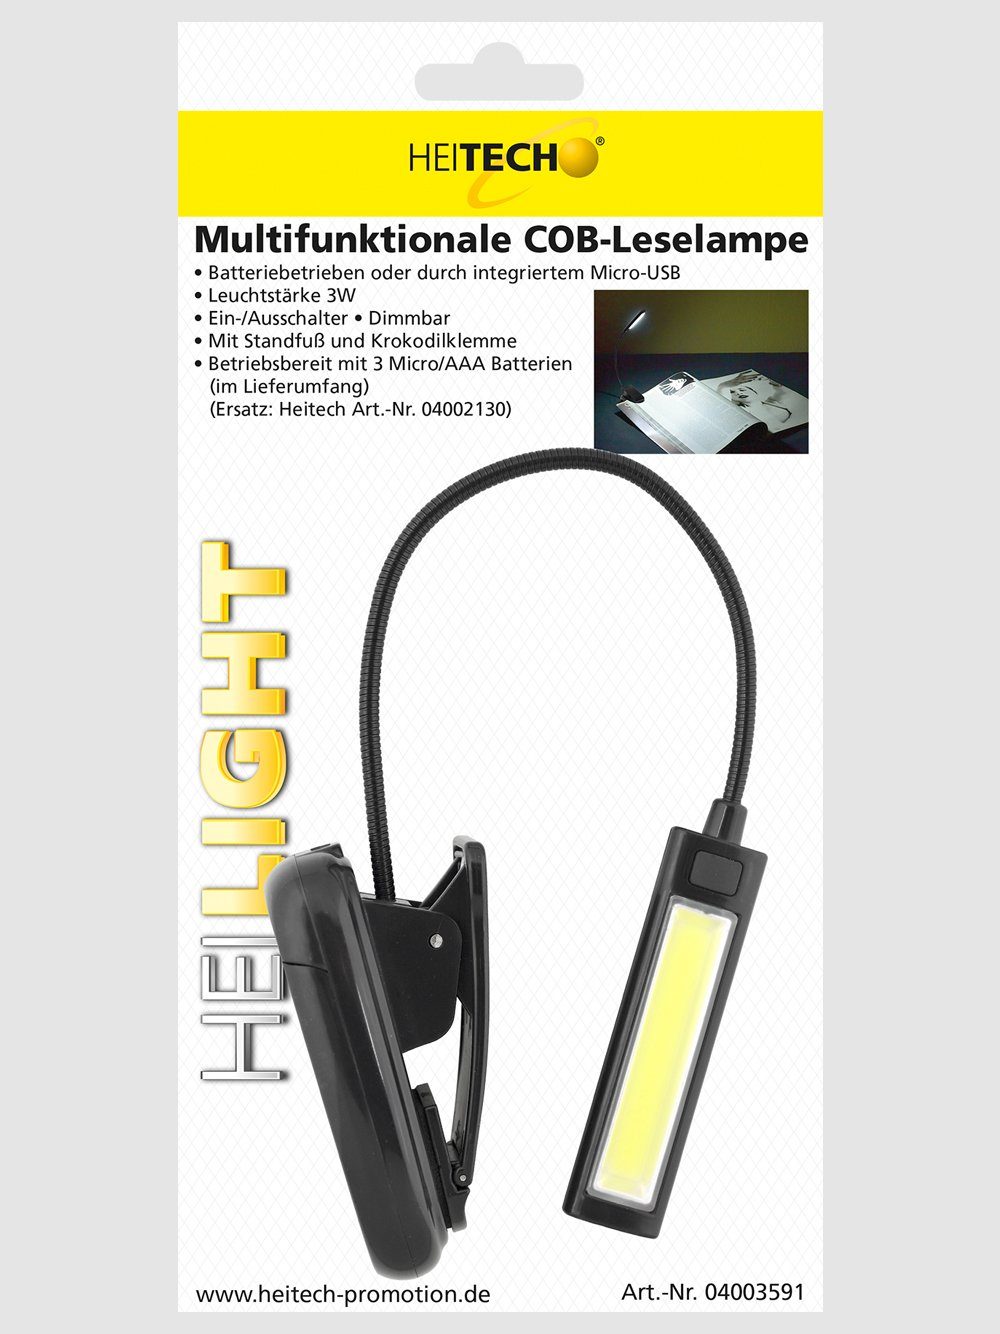 Multifunktionale Standfuß COB-Leselampe Mit LED HEITECH Leselampe